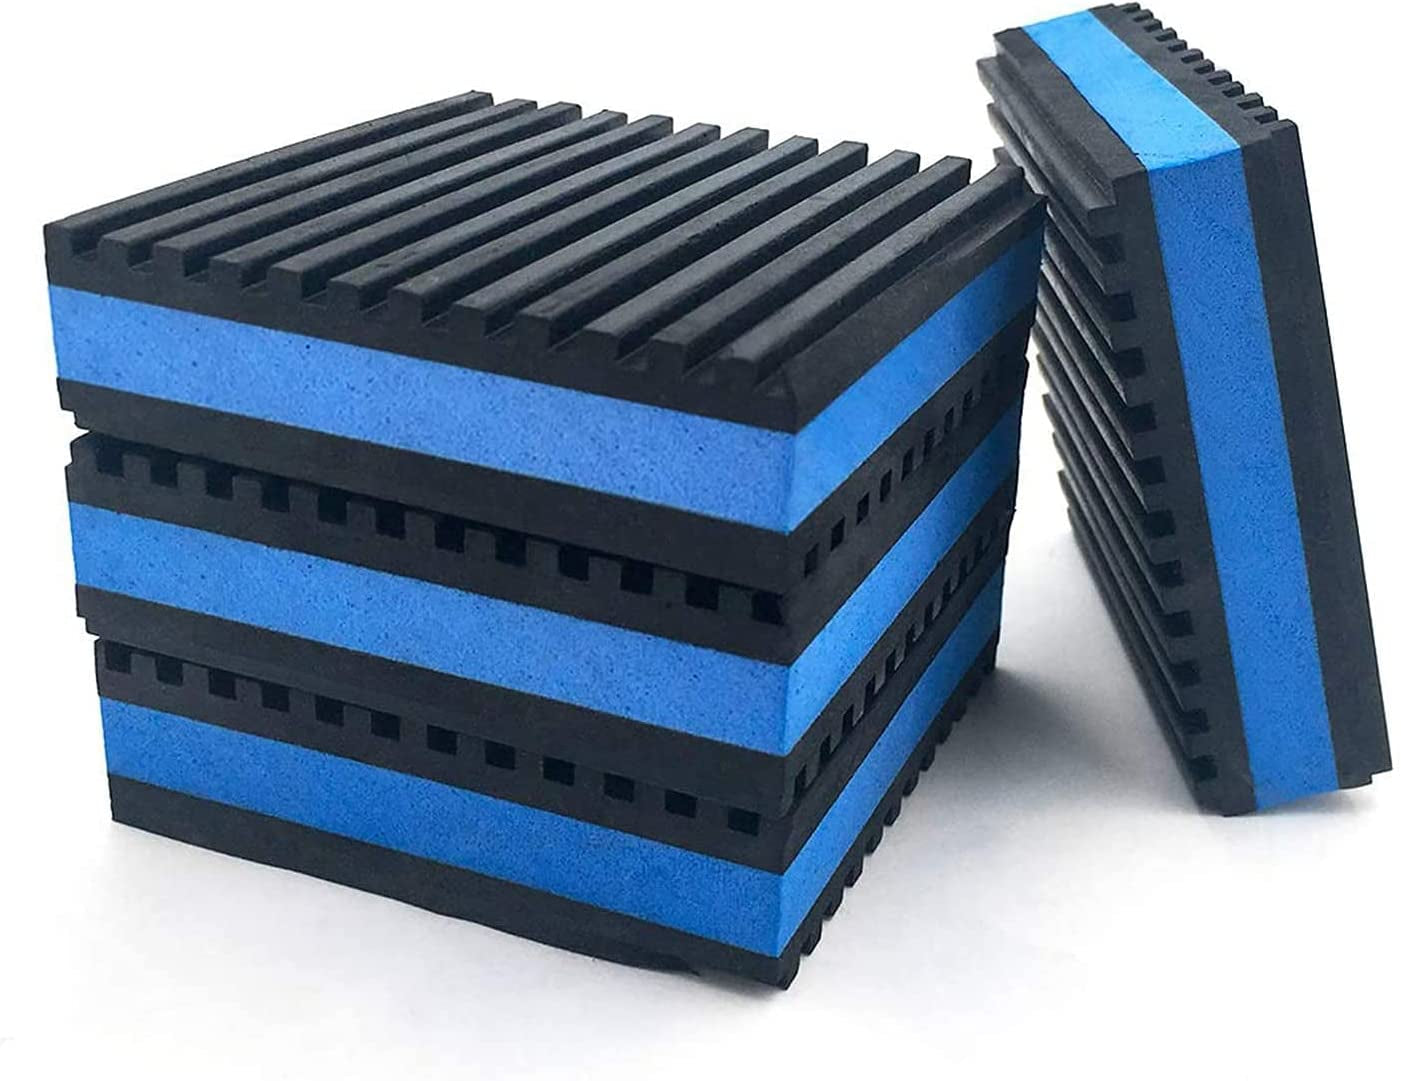 LBG Products, LBG Products Rubber Anti-Vibration Isolator Pads,Heavy Duty Blue EVA Pad for Air Conditioner,Compressors,Hvac,Treadmills Etc(4'' X 4'' X 7/8")